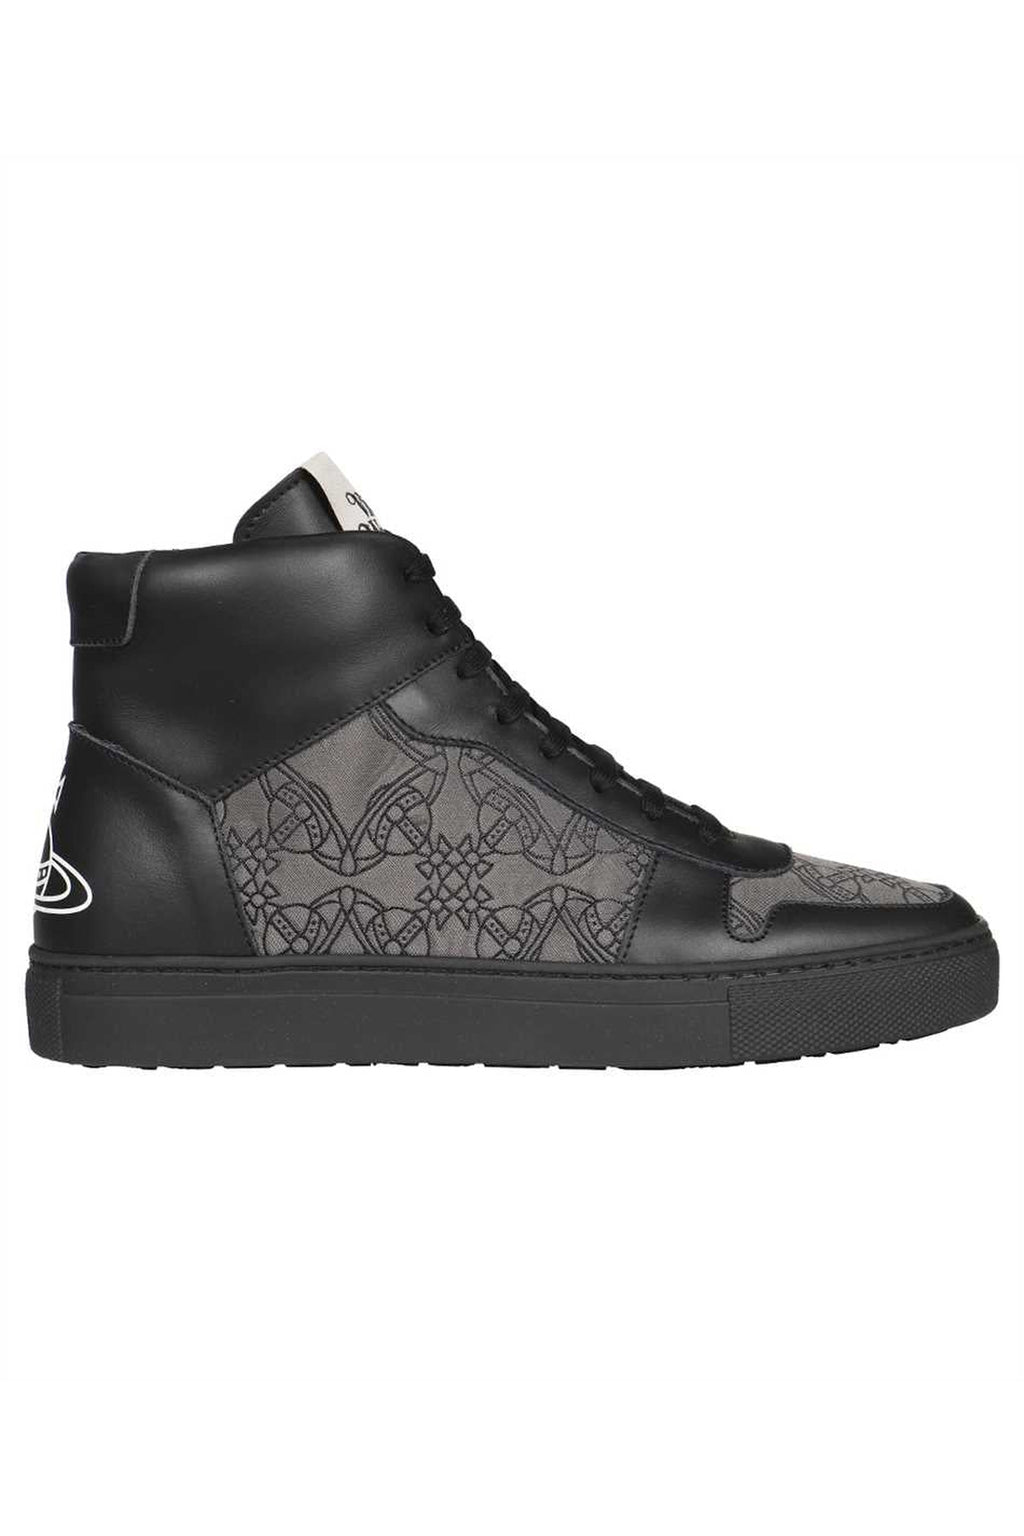 Vivienne Westwood-OUTLET-SALE-High-top leather and technical fabric sneakers-ARCHIVIST